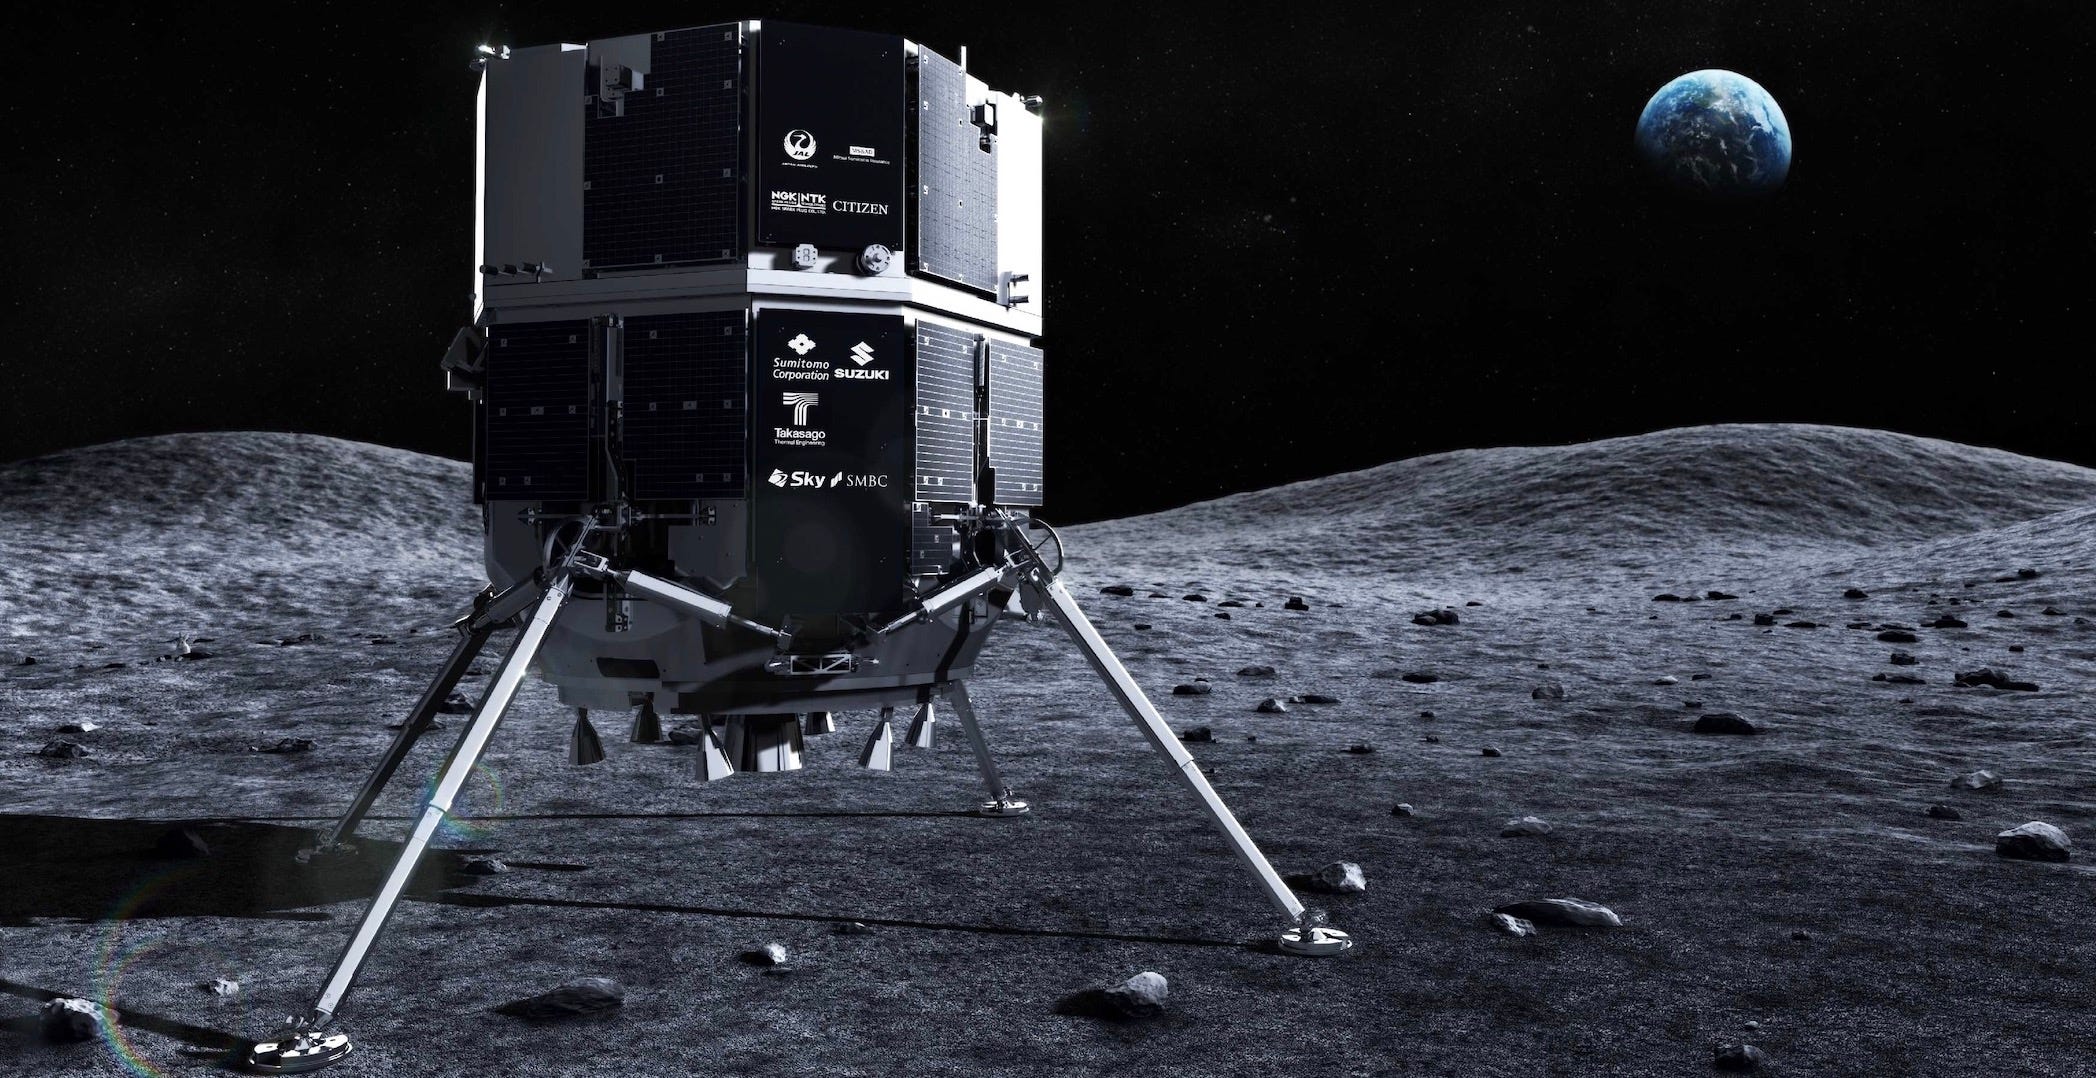 Illustration shows a four-legged lander on a largely plain lunar landscape, with Earth hanging in the pitch black sky.